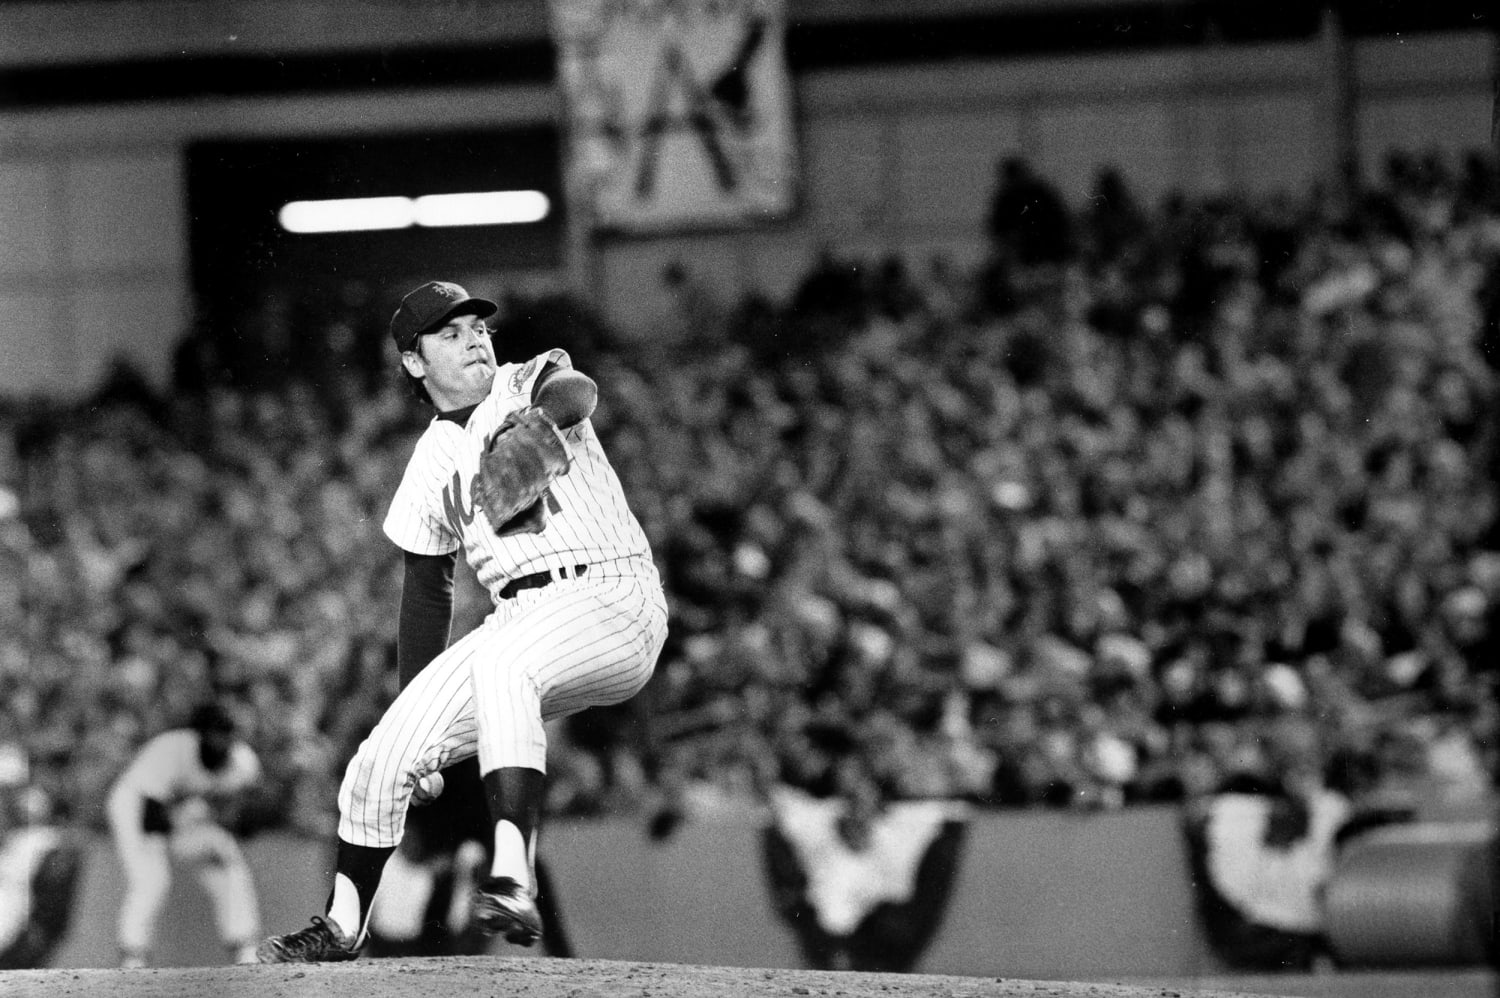 Report: Hall of Fame pitcher Tom Seaver Diagnosed with Dementia